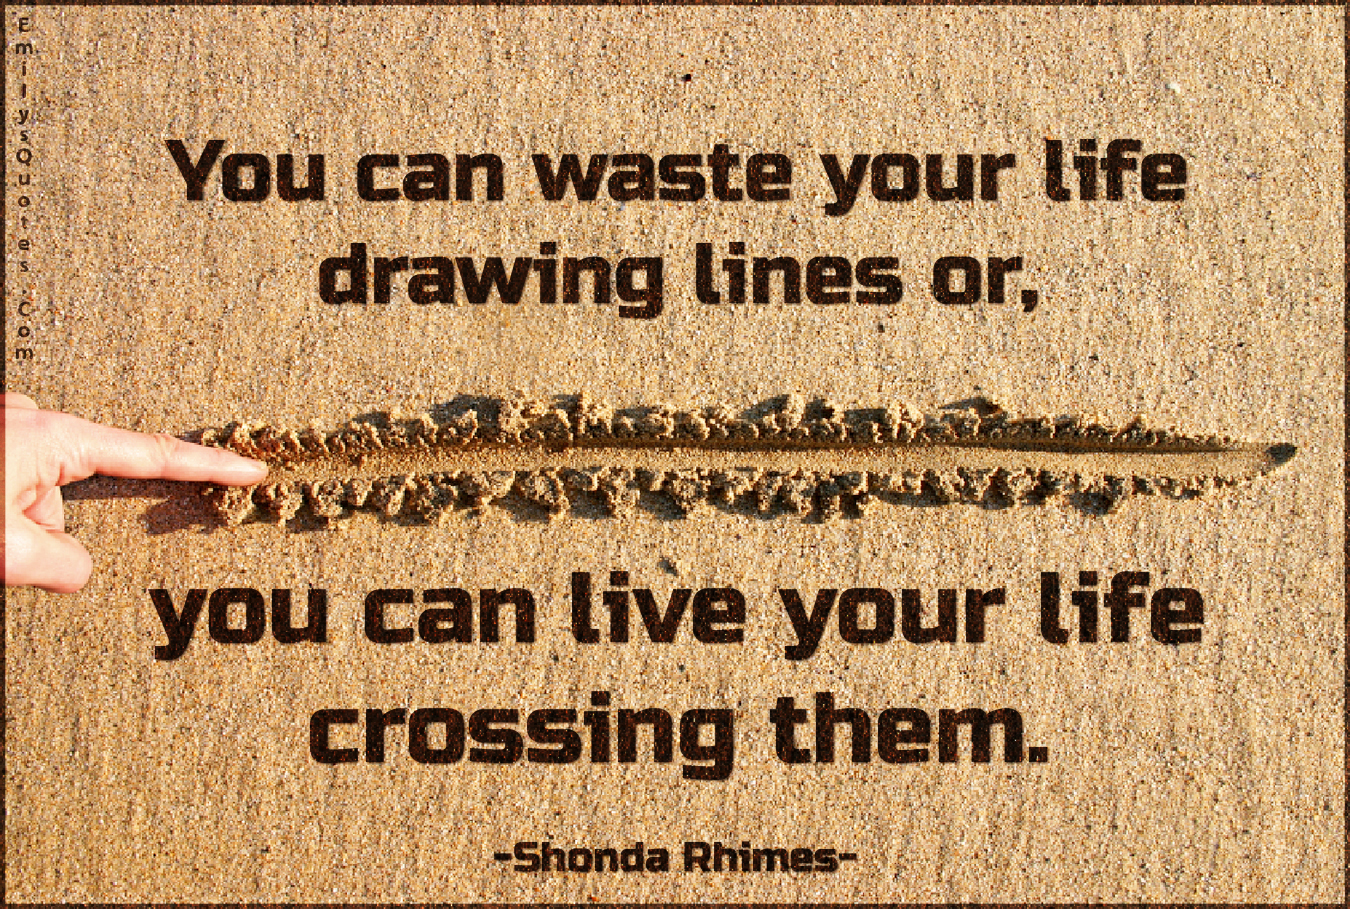 You can waste your life drawing lines or, you can live your life crossing them